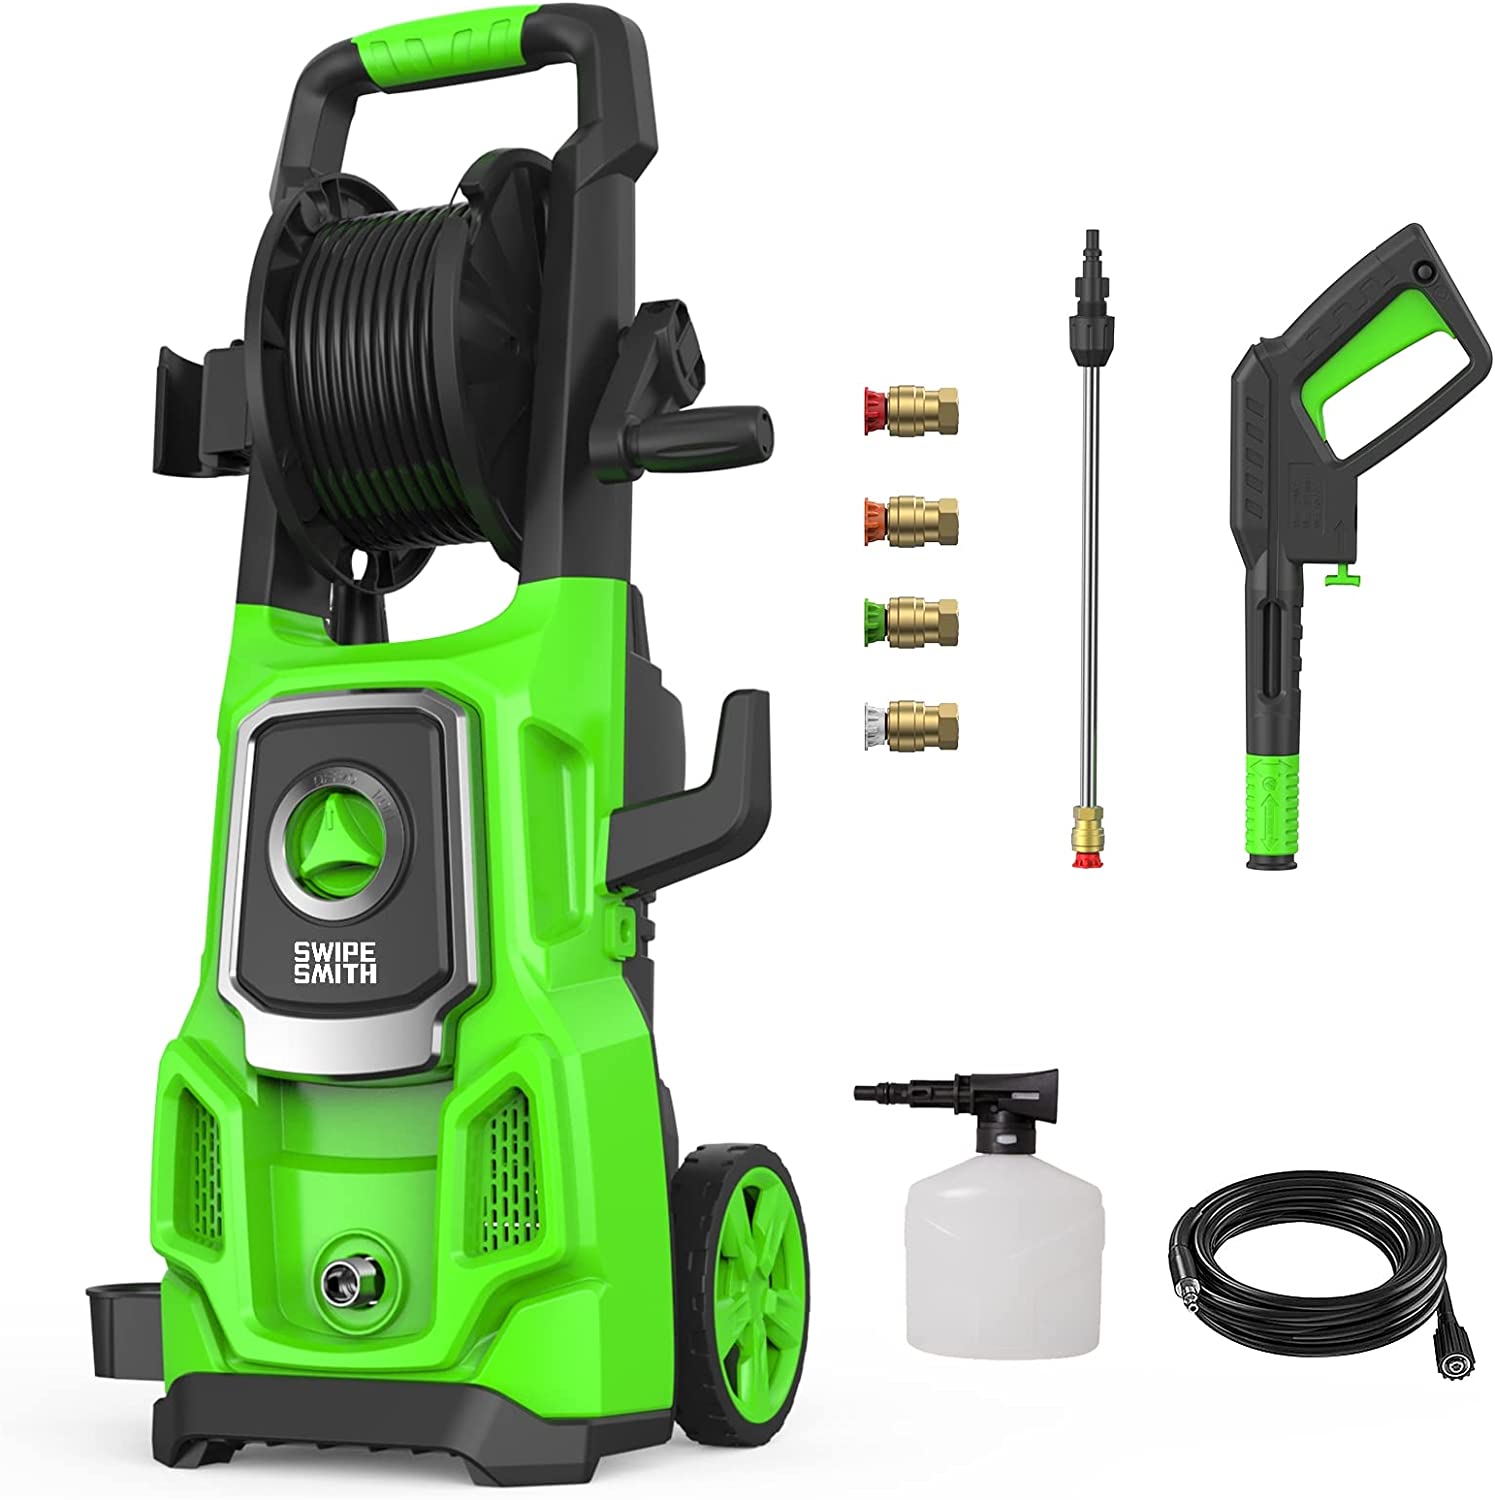 SWIPESMITH Electric Pressure Washer, 3000 Max PSI, 2.6 GPM Power Washer Machine with Hose Reel